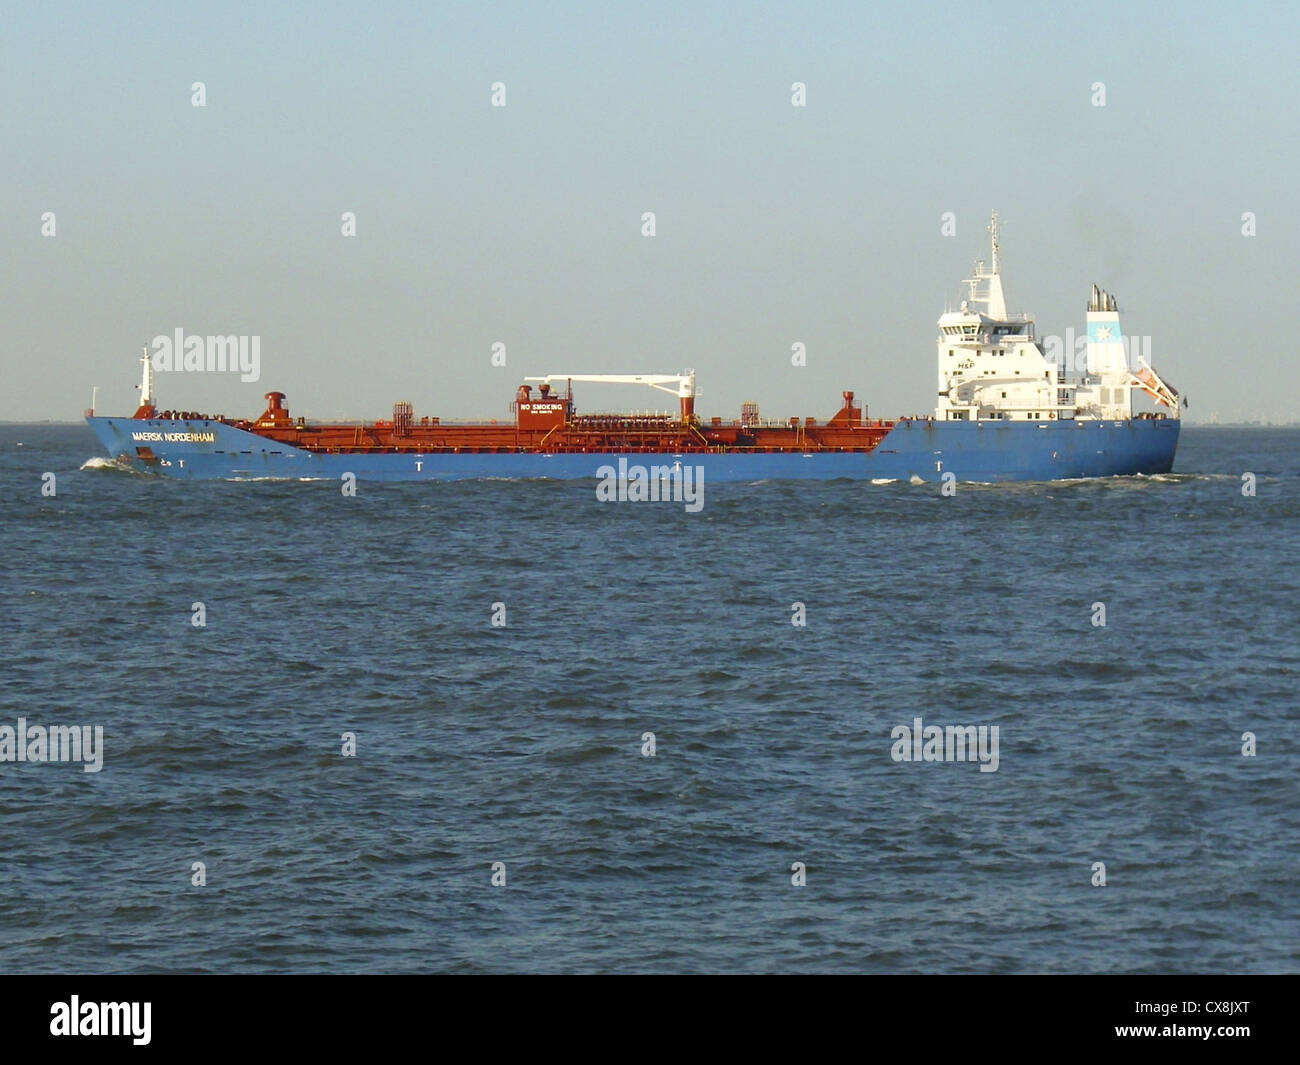 The oil/chemical tanker '''Maersk Nordenham''' outbound on the Elbe river Stock Photo